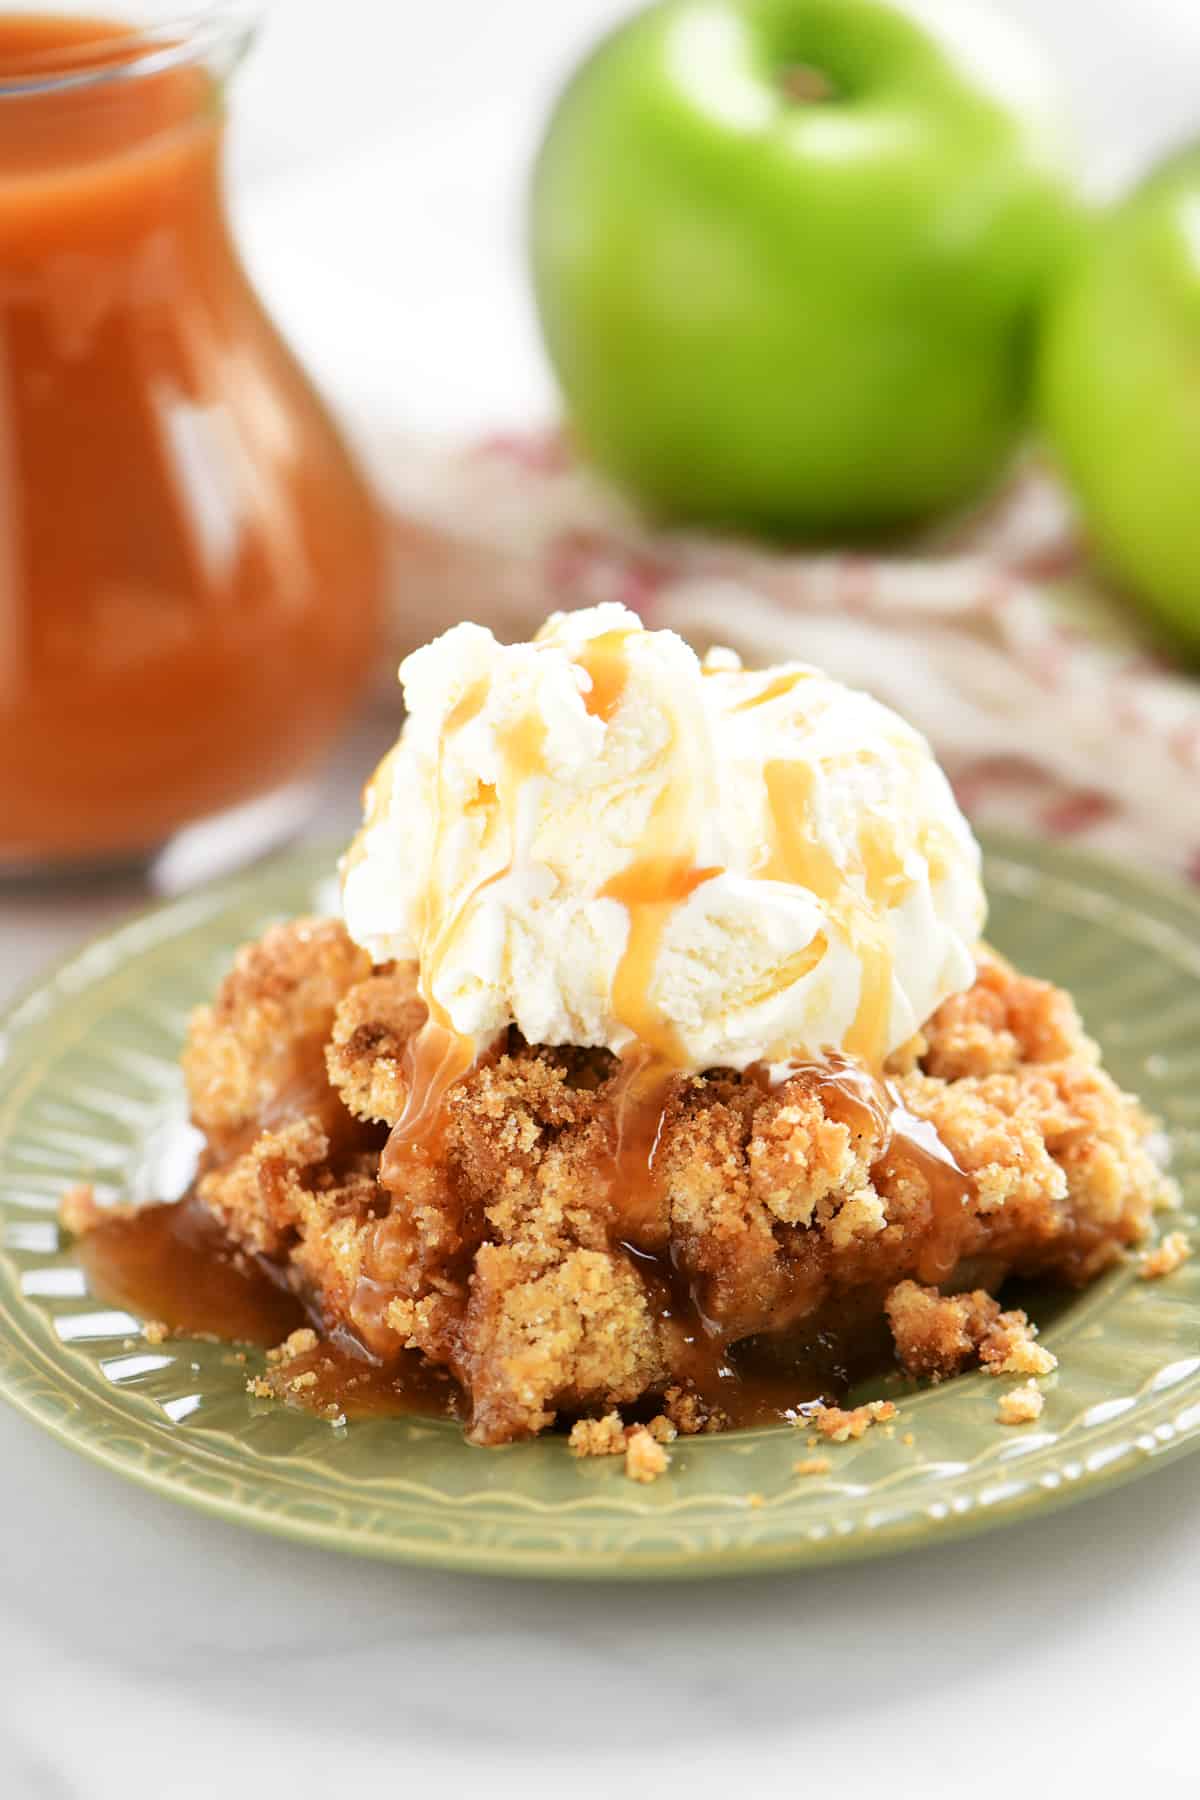 slice of apple crumble on a green plate with vanilla ice cream and caramel on top